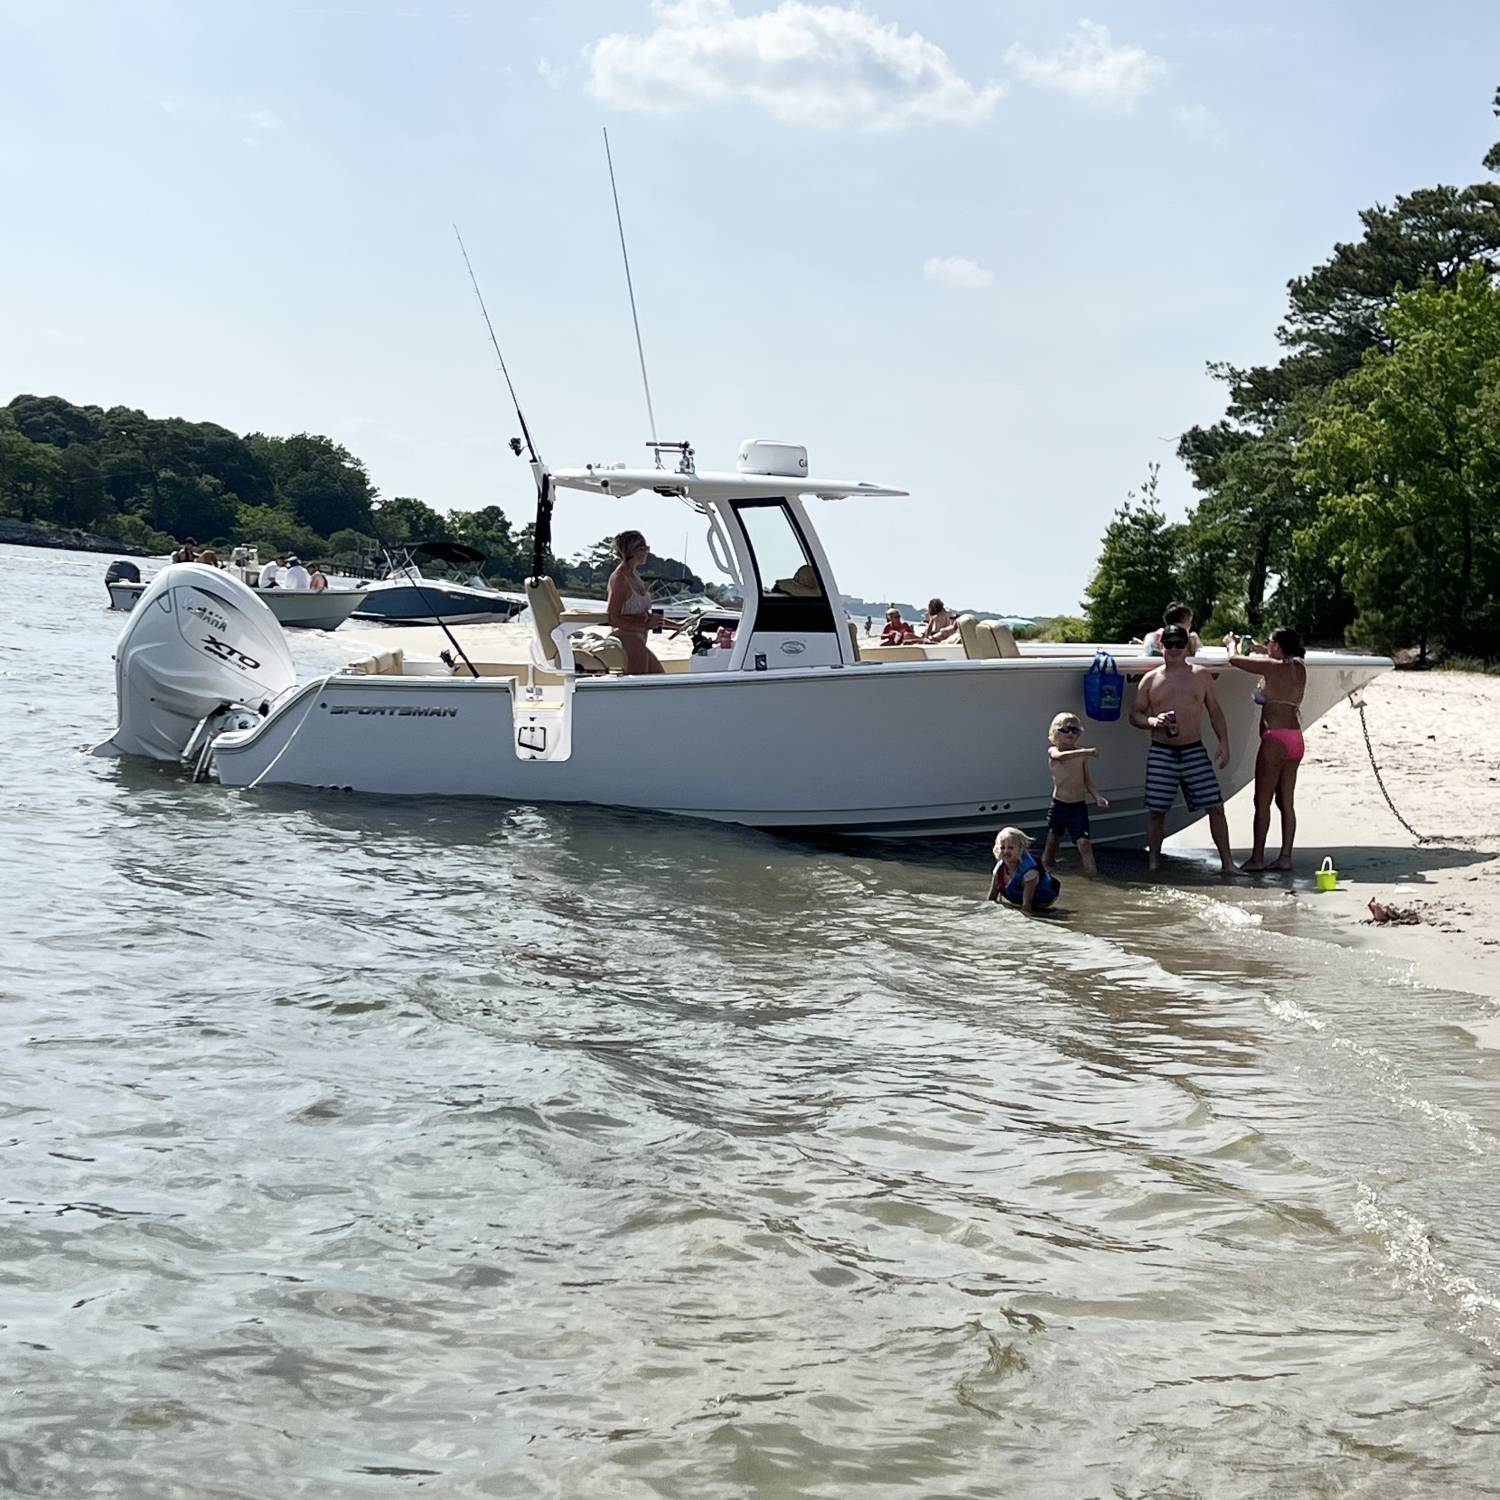 Title: The Jacksons - On board their Sportsman Heritage 261 Center Console - Location: The narrows, Virginia Beach. Participating in the Photo Contest #SportsmanMay2024